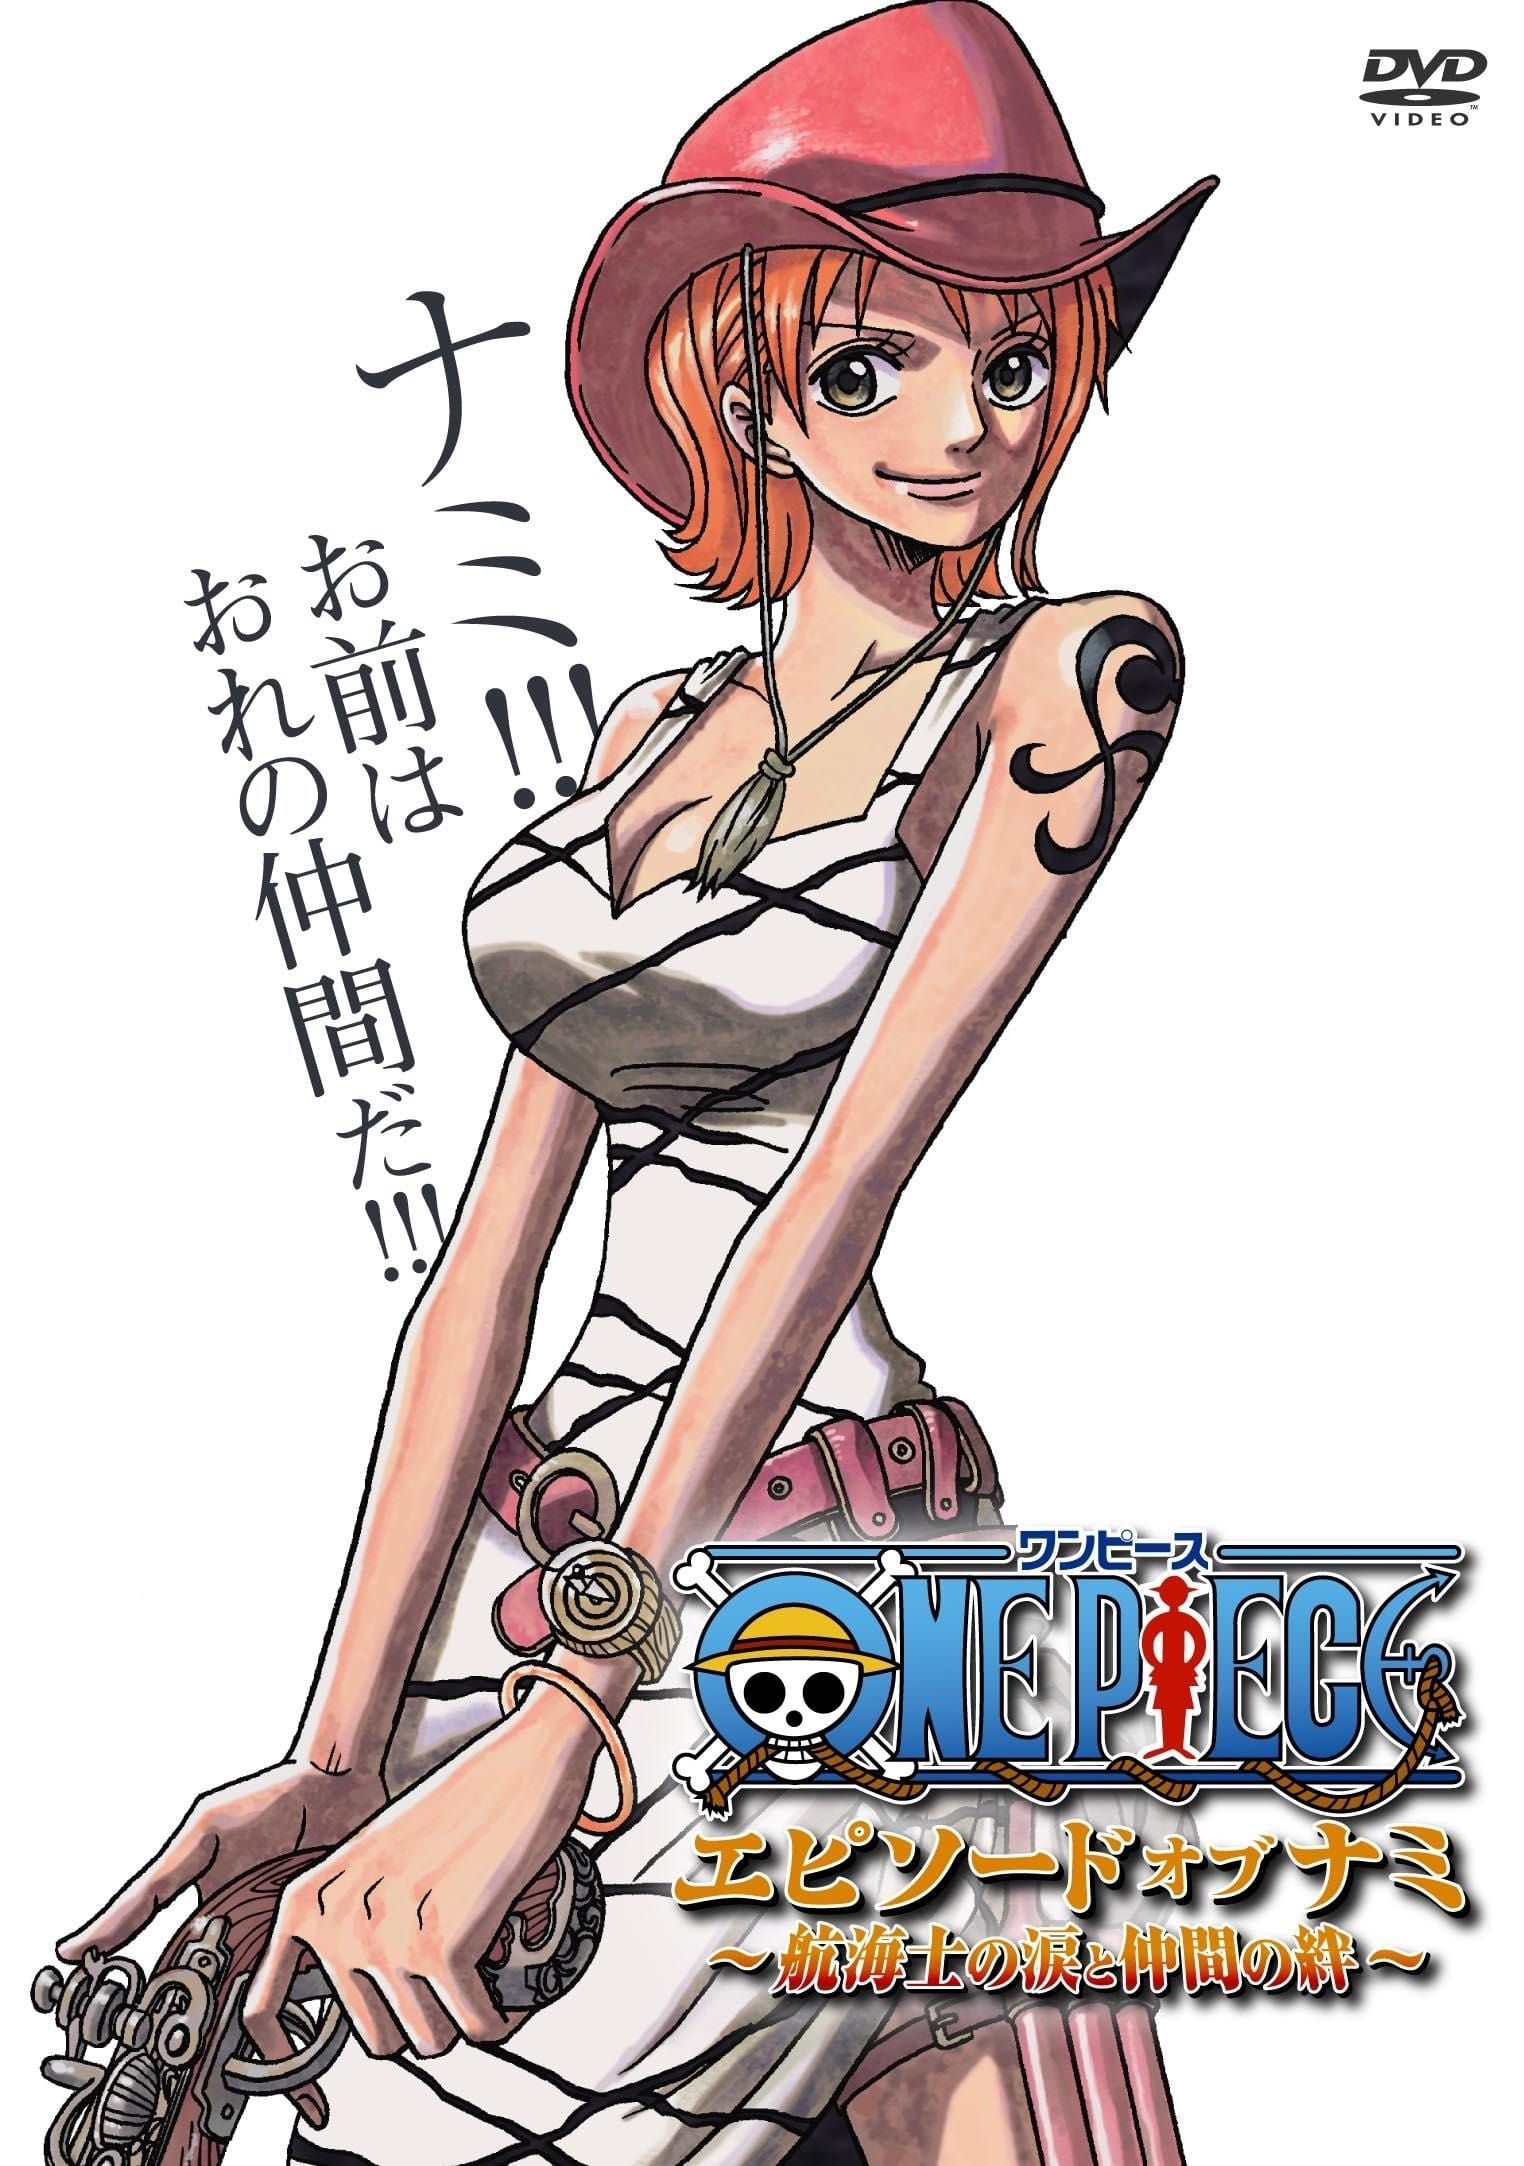 One Piece: Episode Of Merry Dreams Of My Nakamas by hazzardlook on